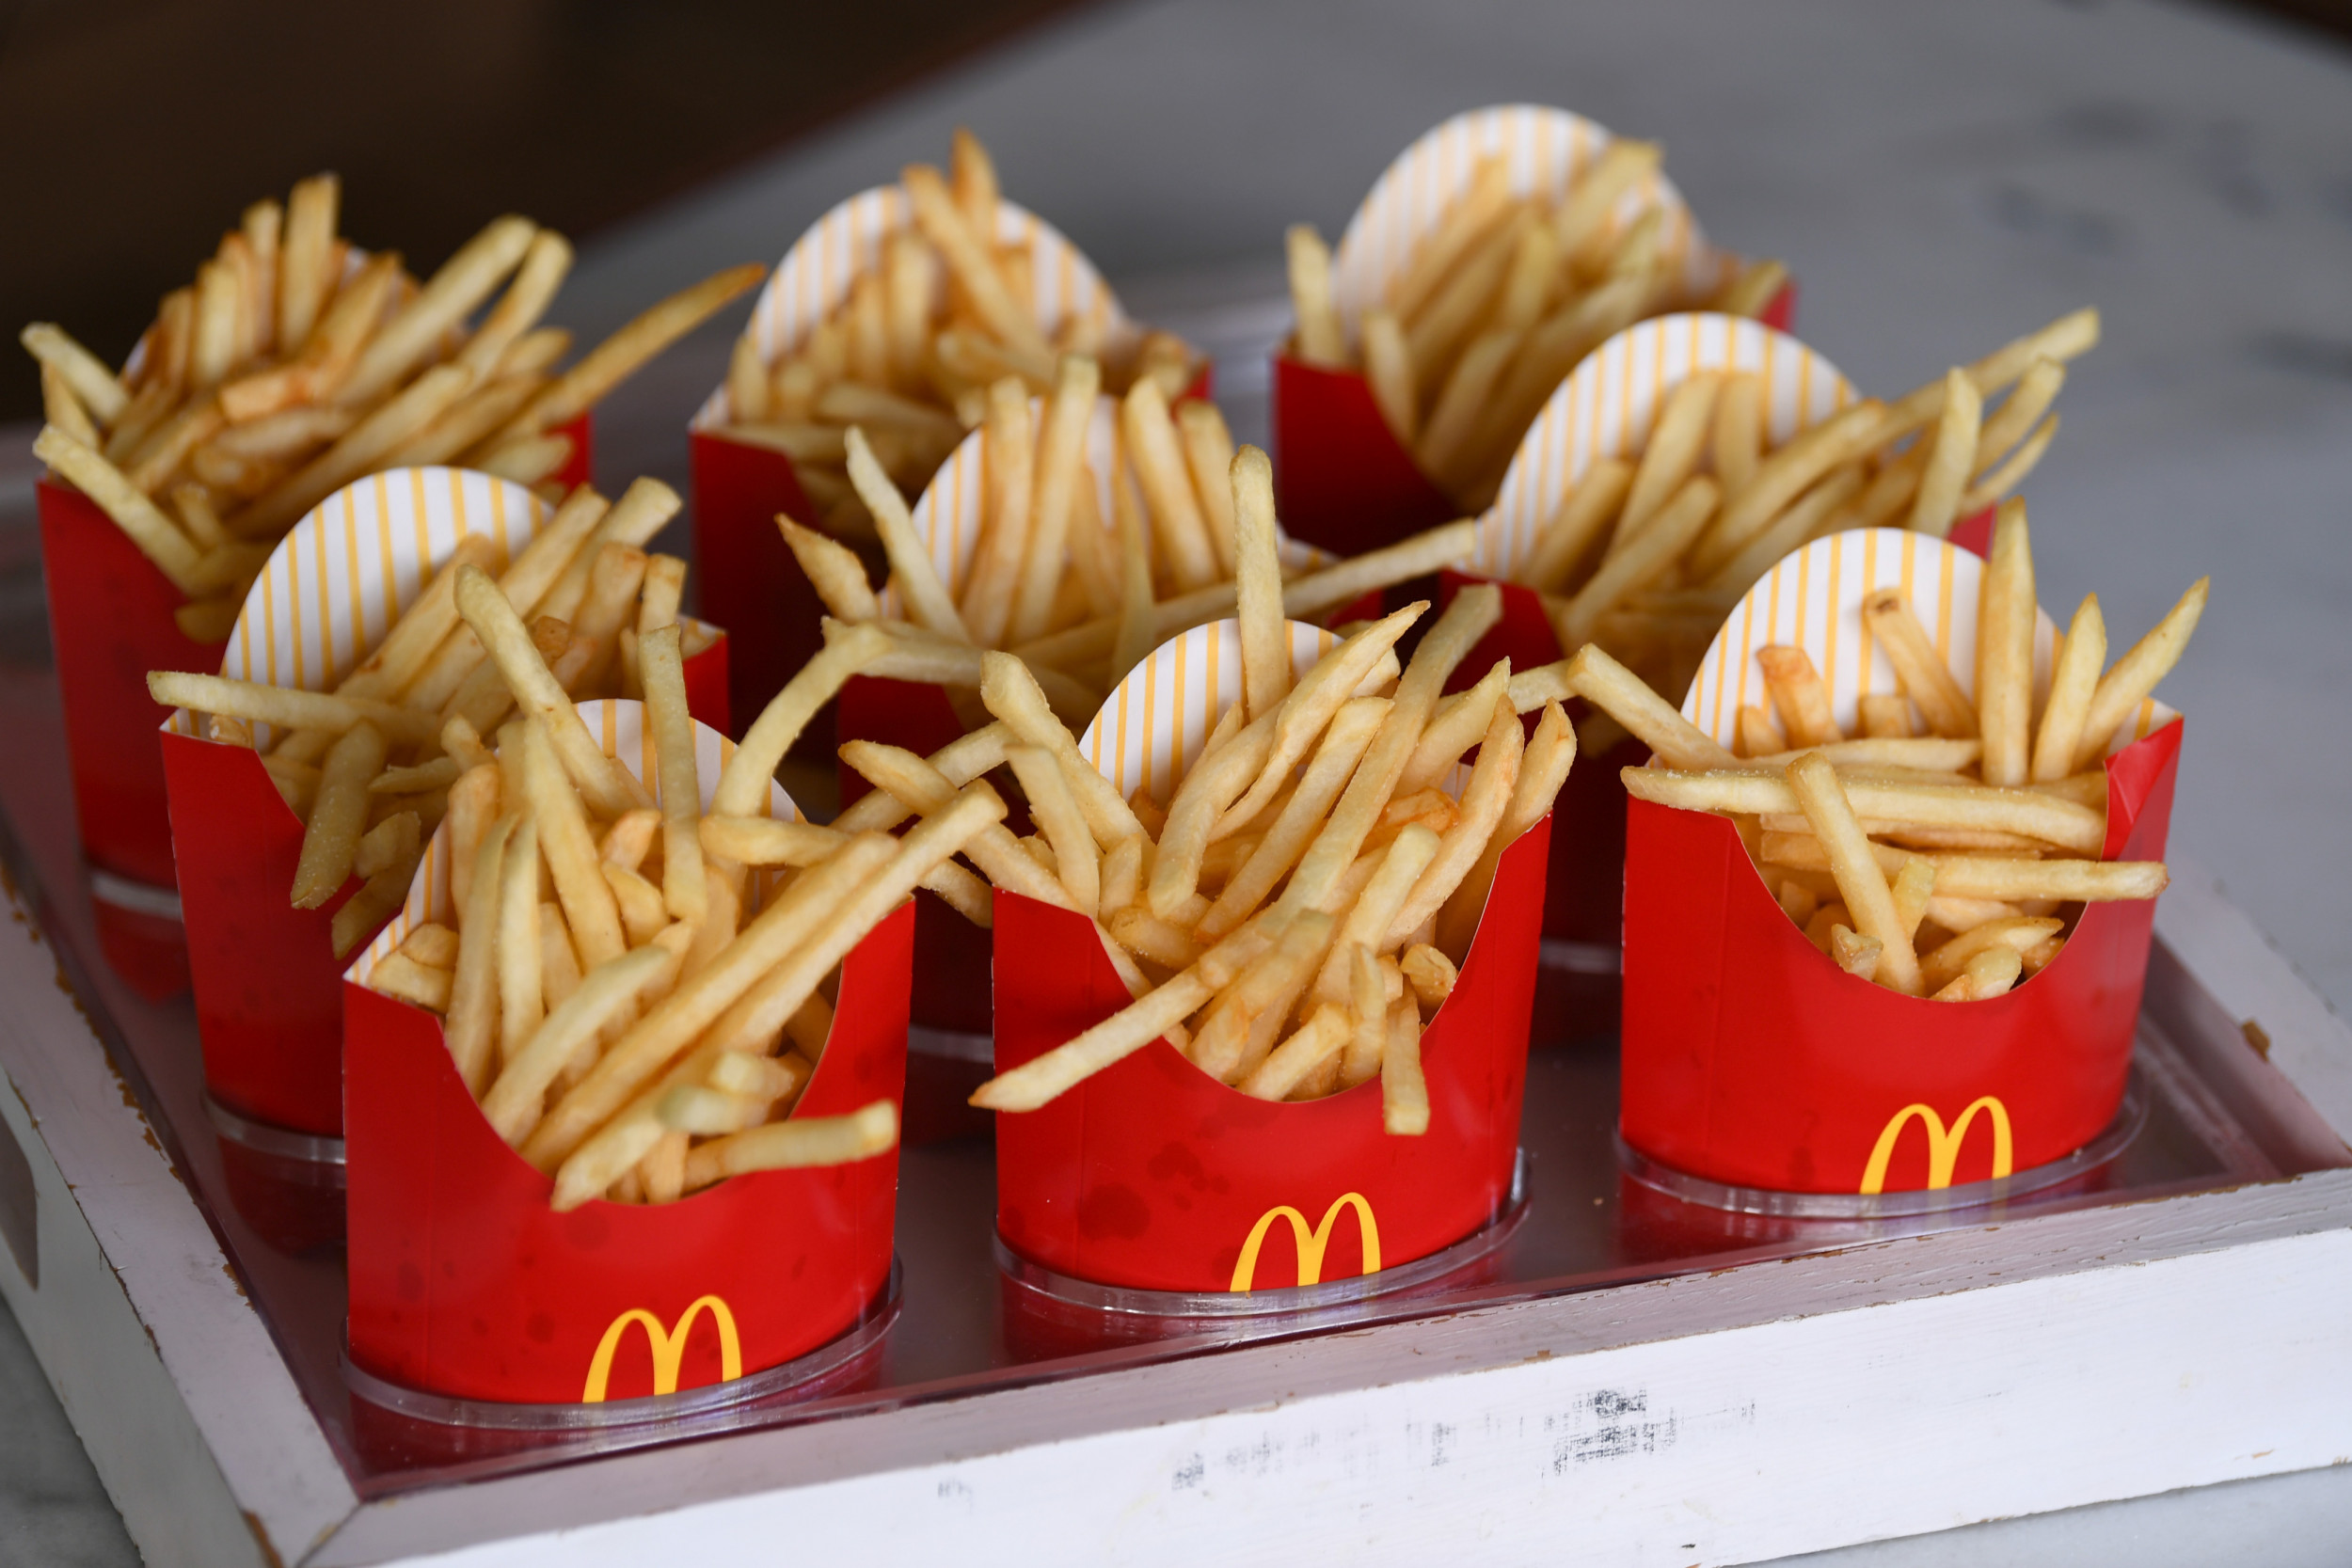 How McDonald's Makes Its Fries Compared to Five Guys is Wildly Different